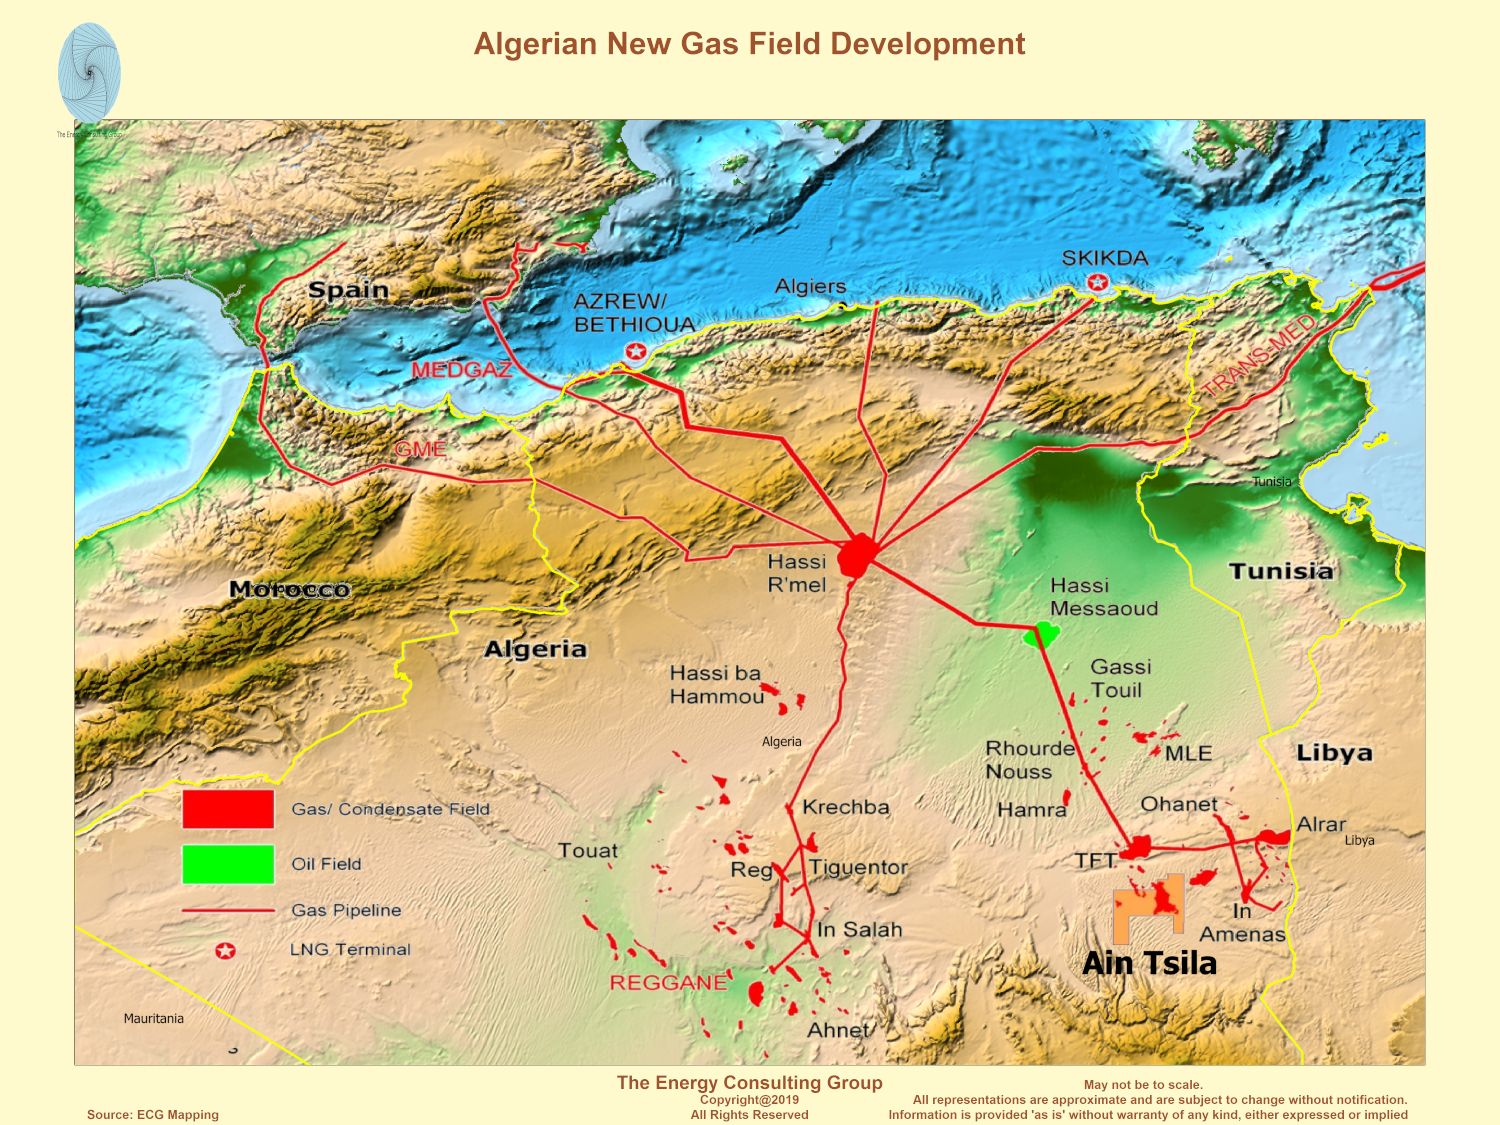 The Upstream Oil And Gas Industry In Algeria